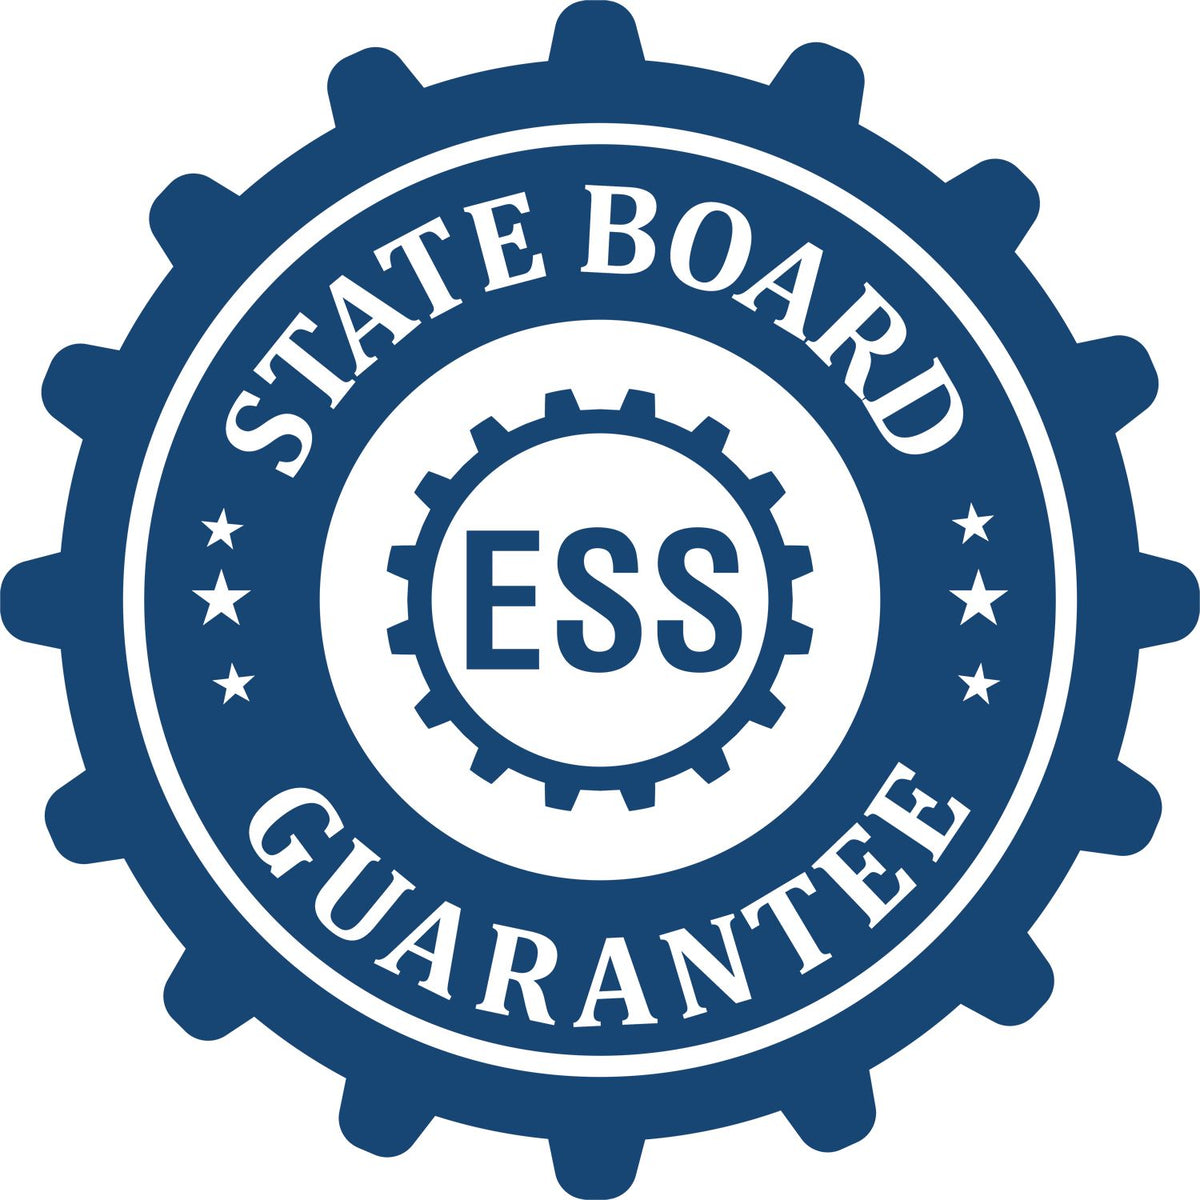 An emblem in a gear shape illustrating a state board guarantee for the Gift Texas Engineer Seal